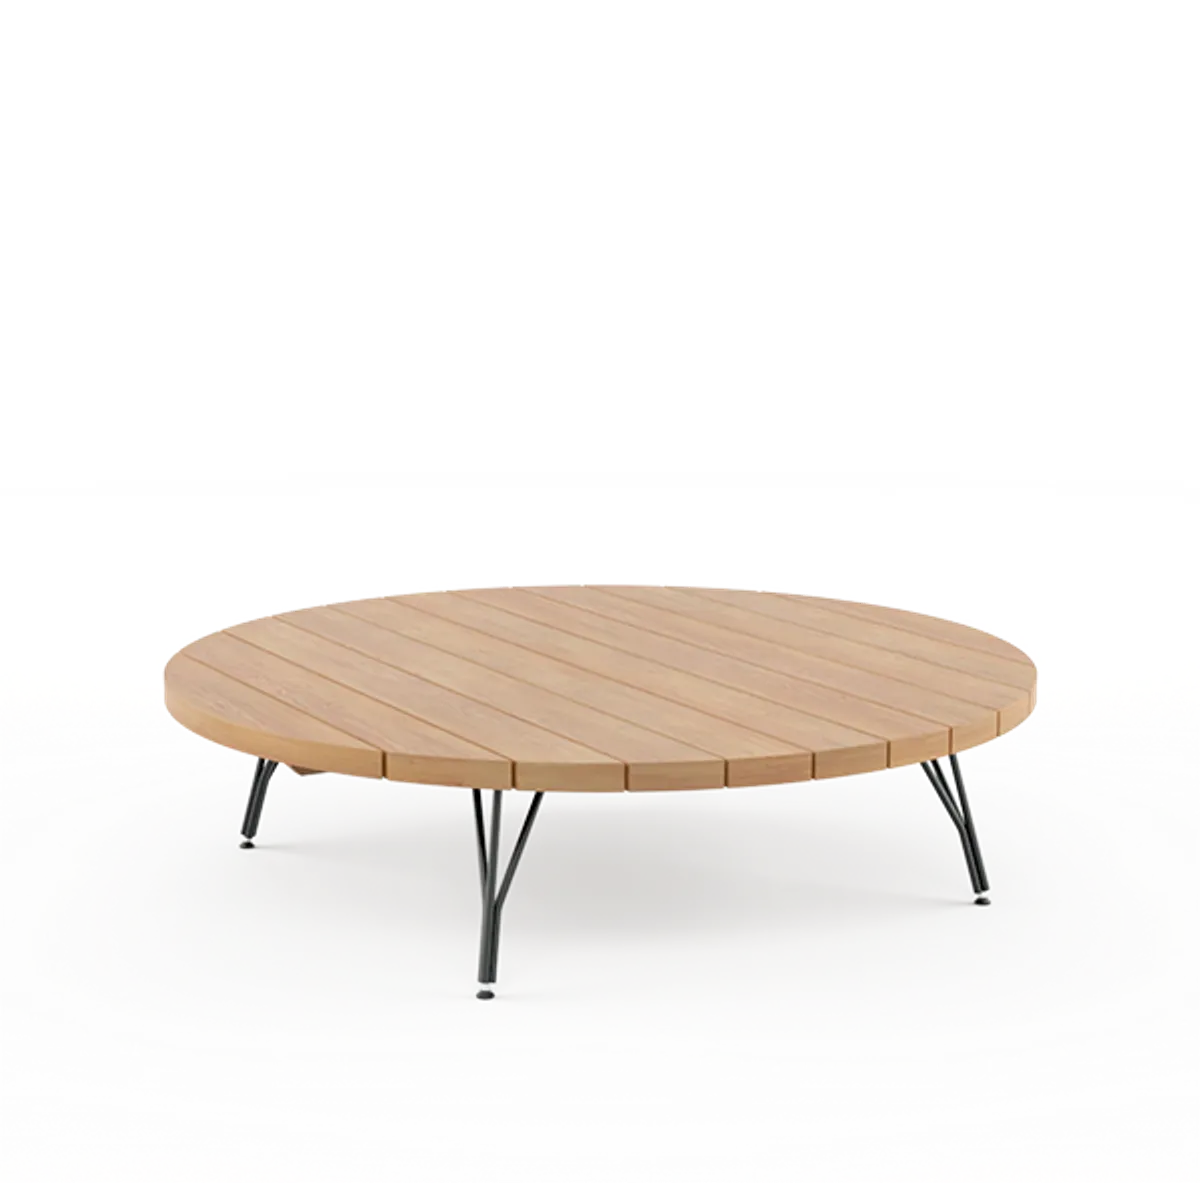 Lavida Bespoke Coffee Table Exclusive To Inside Out Contratcs